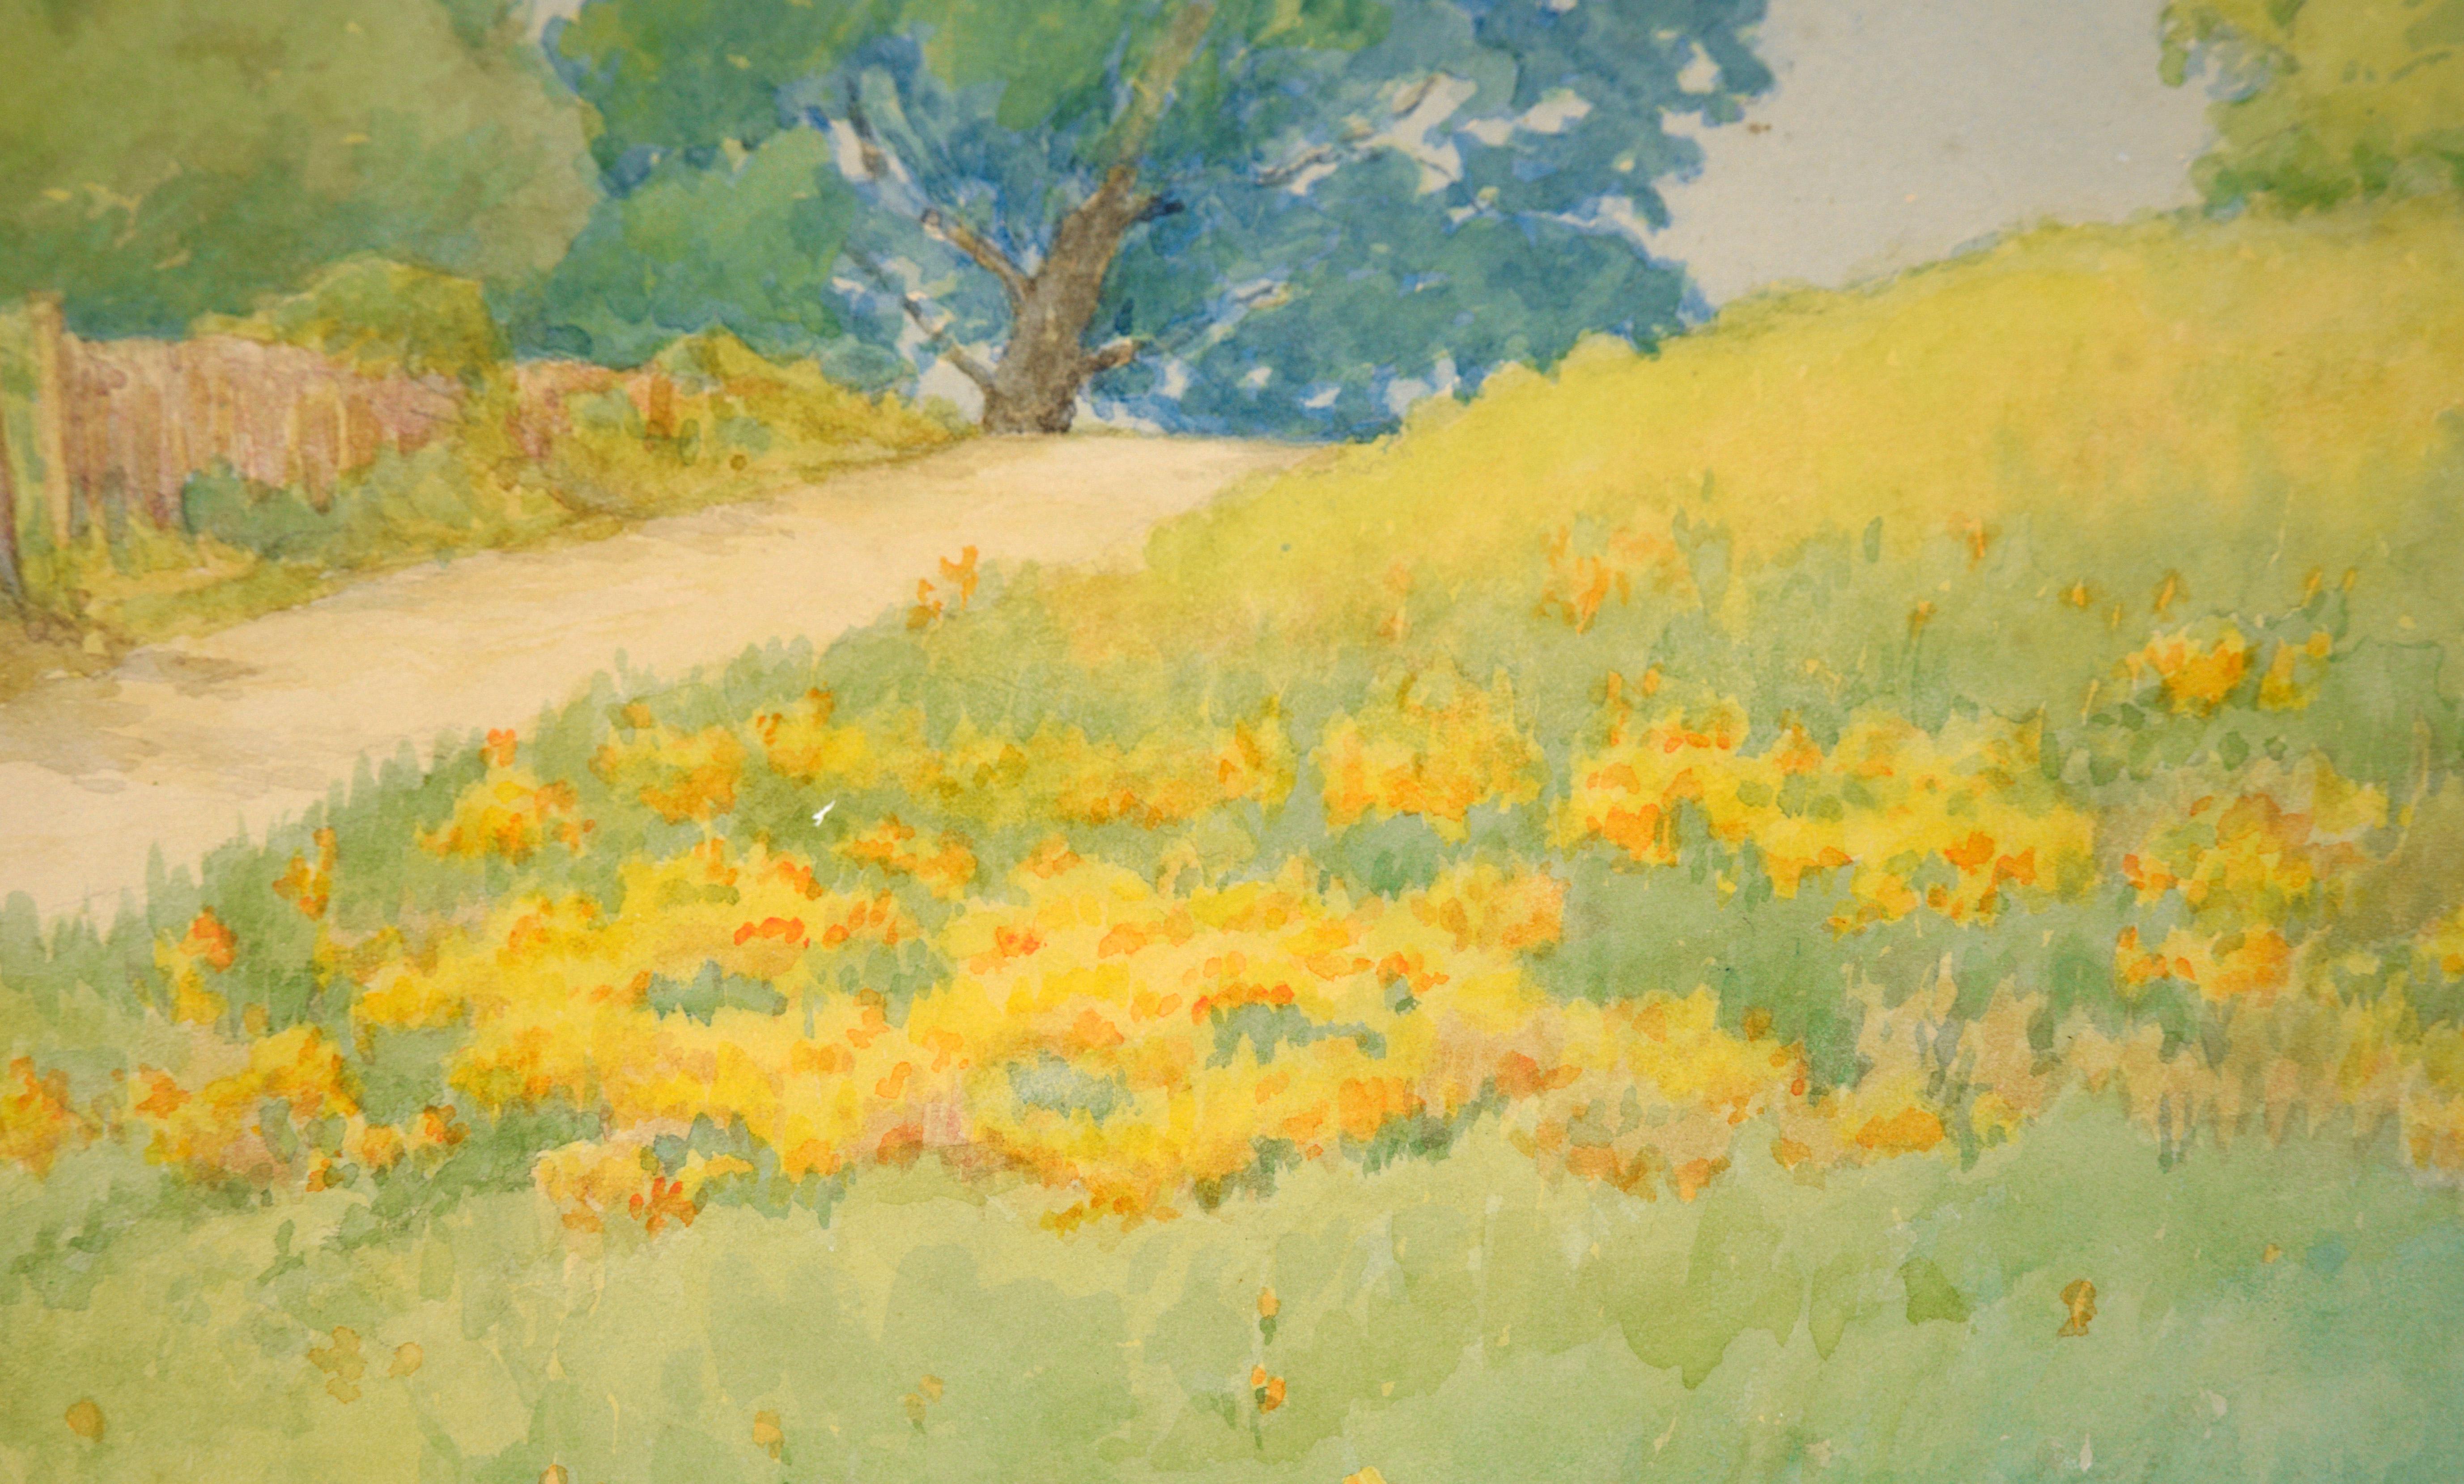 California Golden Poppies and Blue Oaks - Rural Landscape in Watercolor on Paper For Sale 3